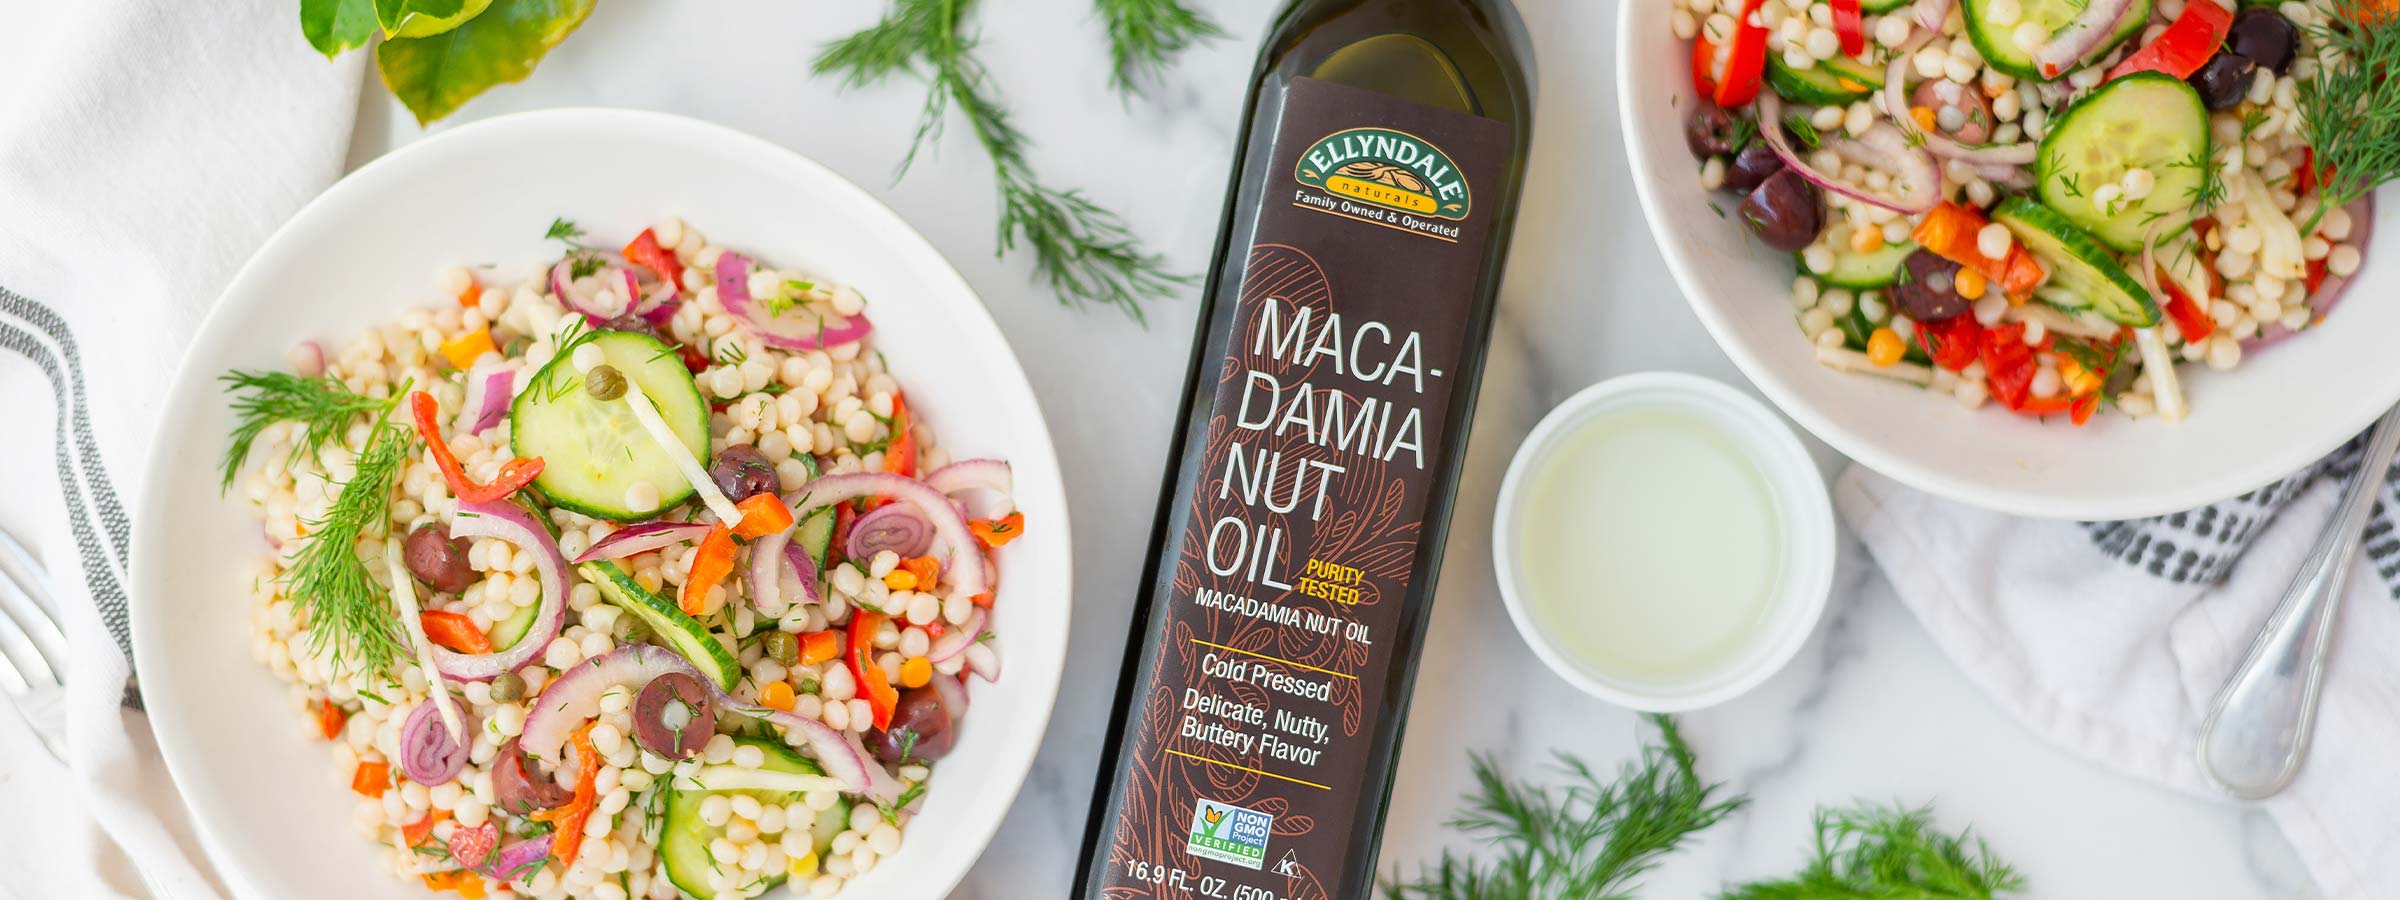 two bowls of mediterranean salads with a bottle of ellyndale macadamia nut oil in between 